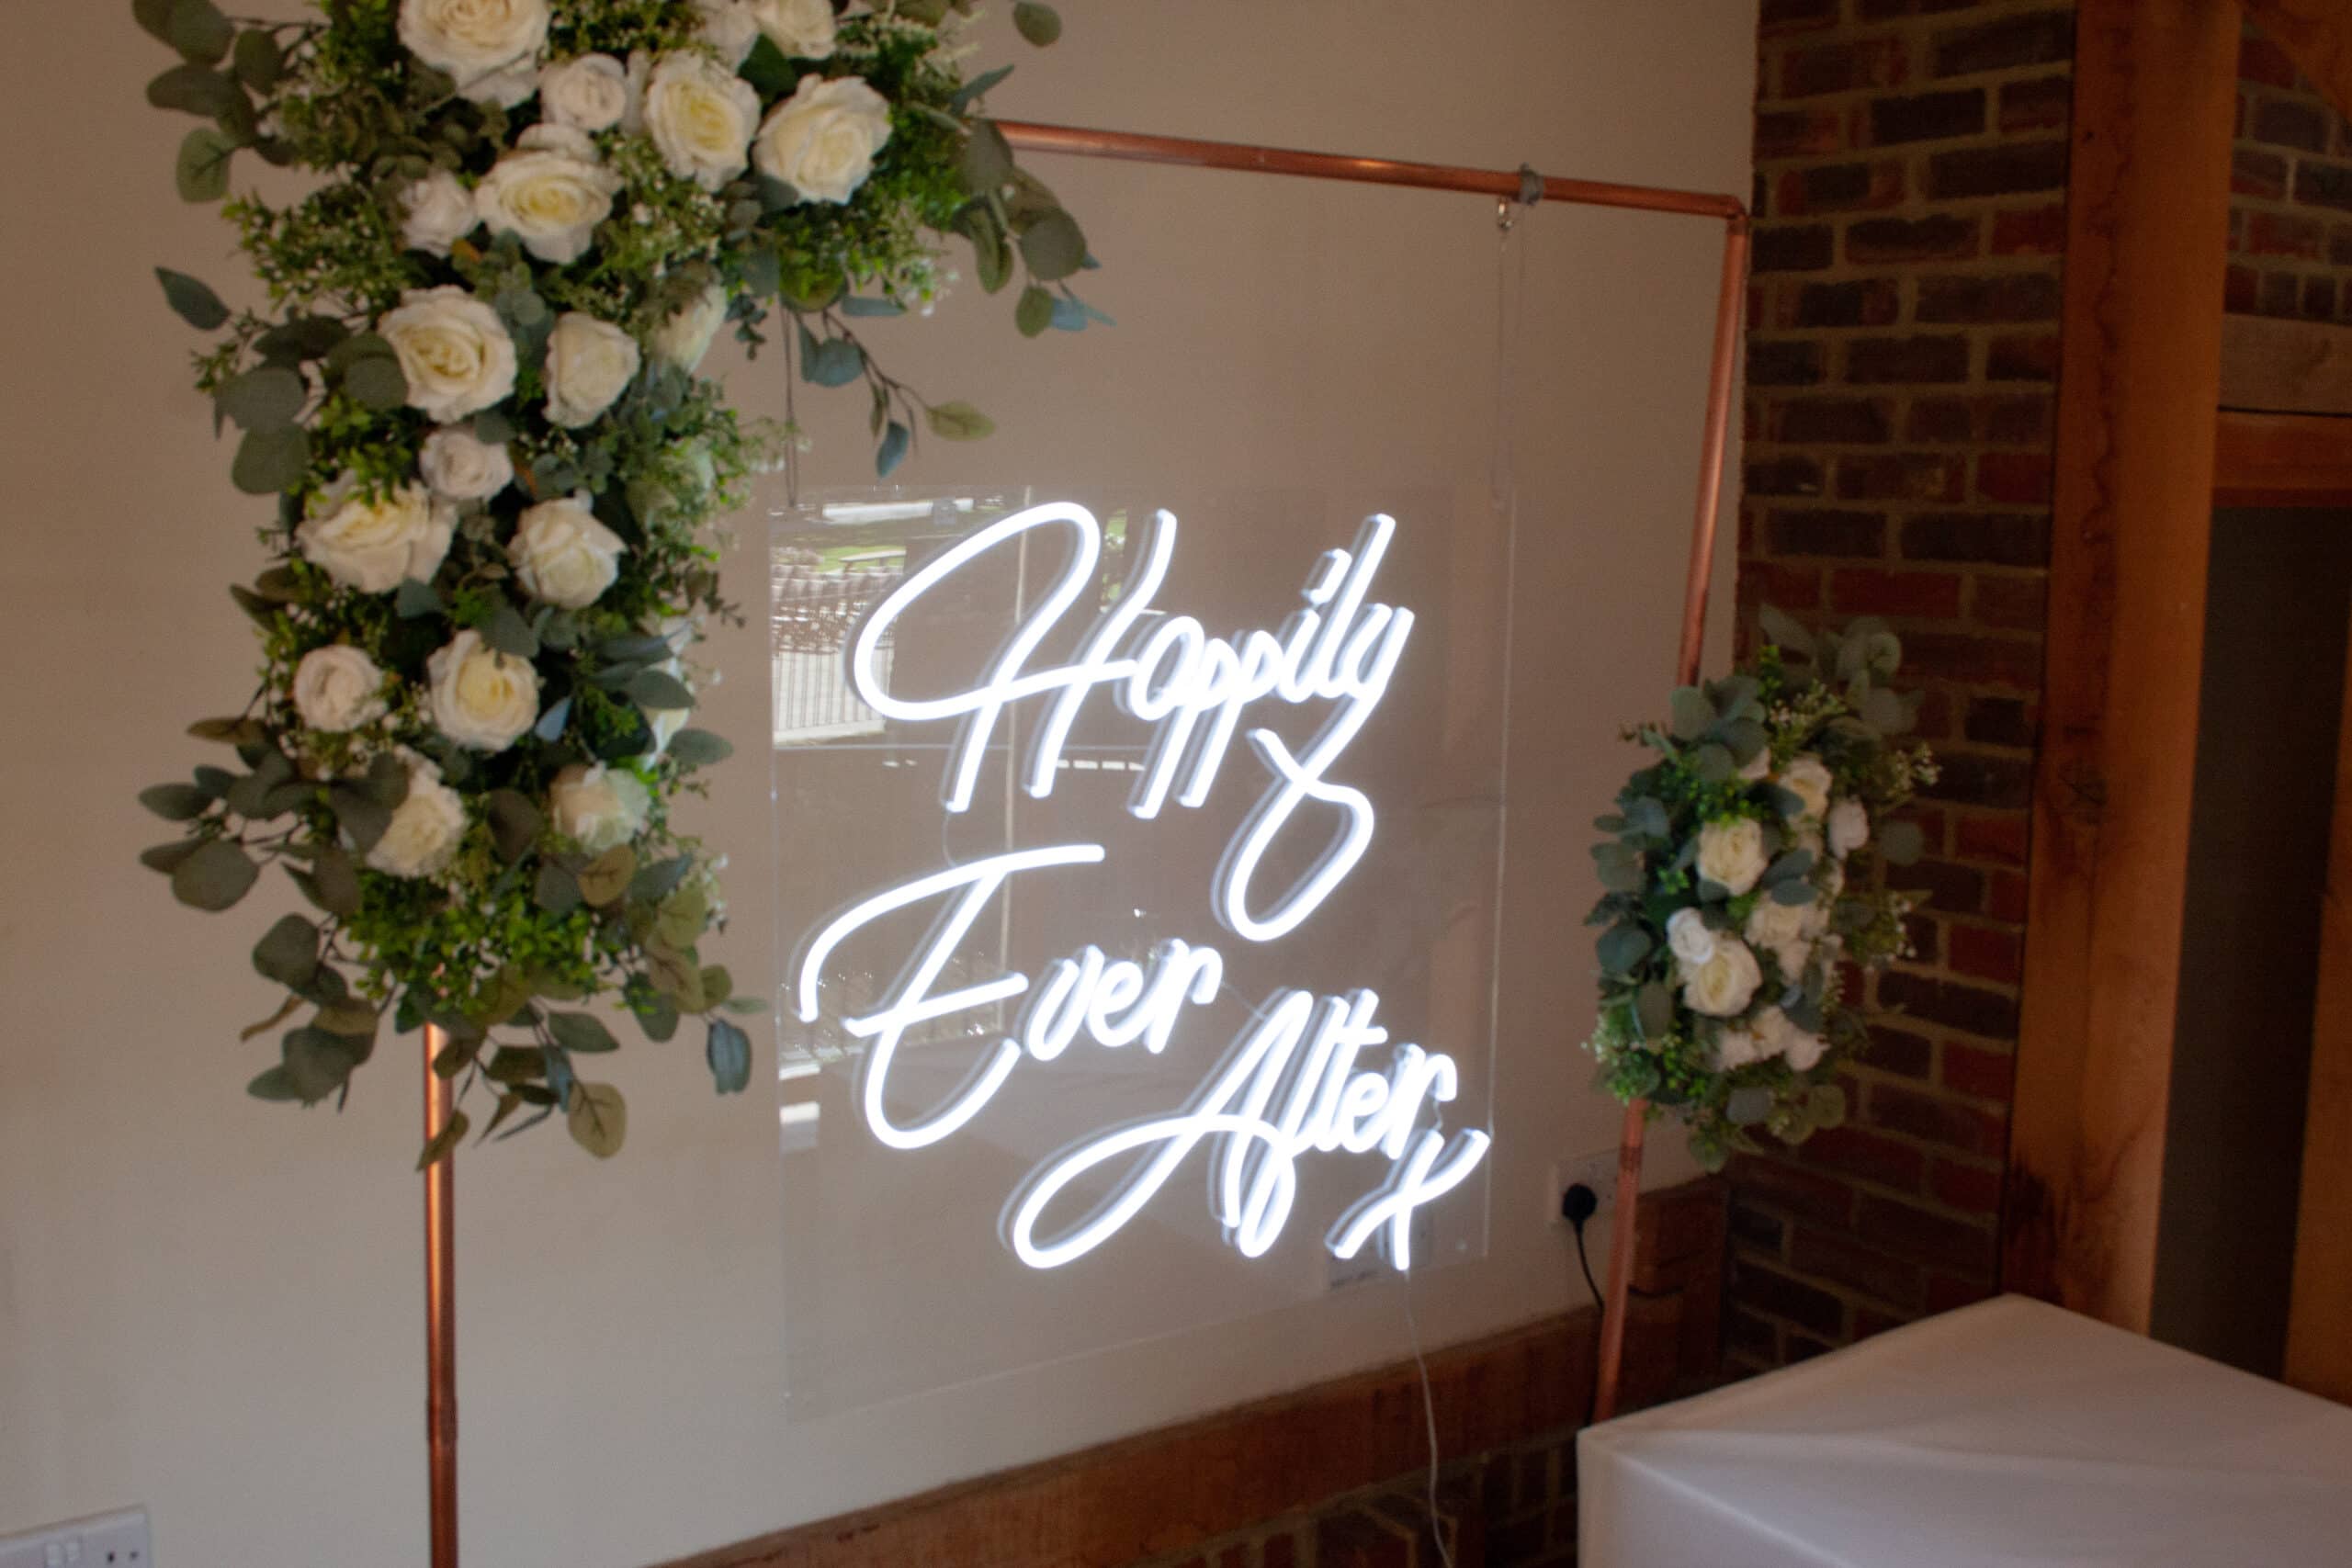 Happily Ever After Neon Sign Tewin Bury Farm